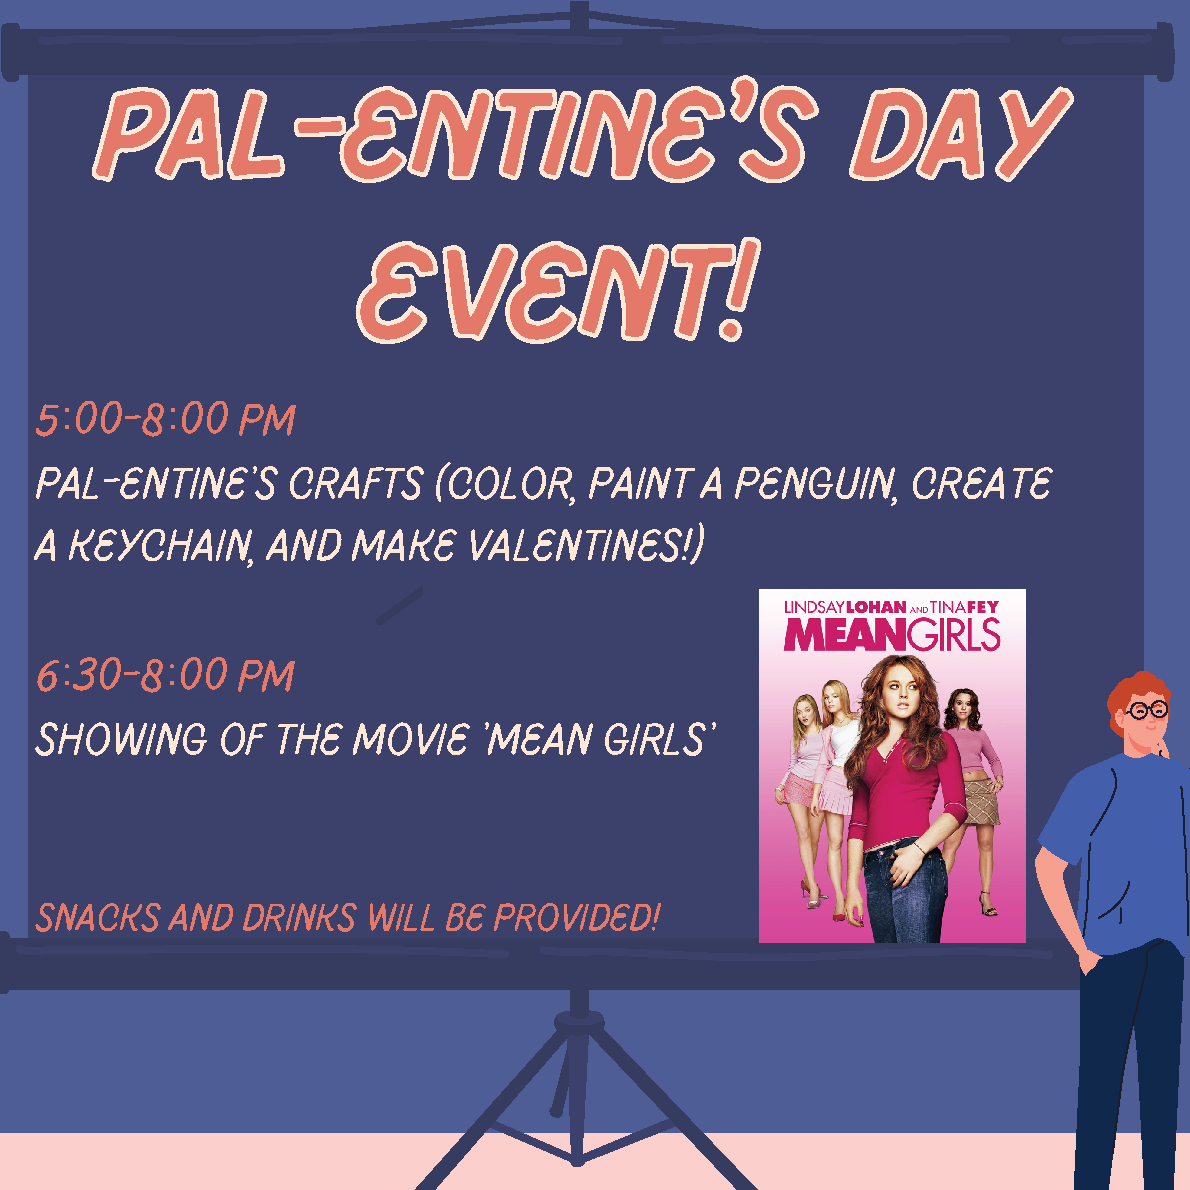 Pal-entine's Day